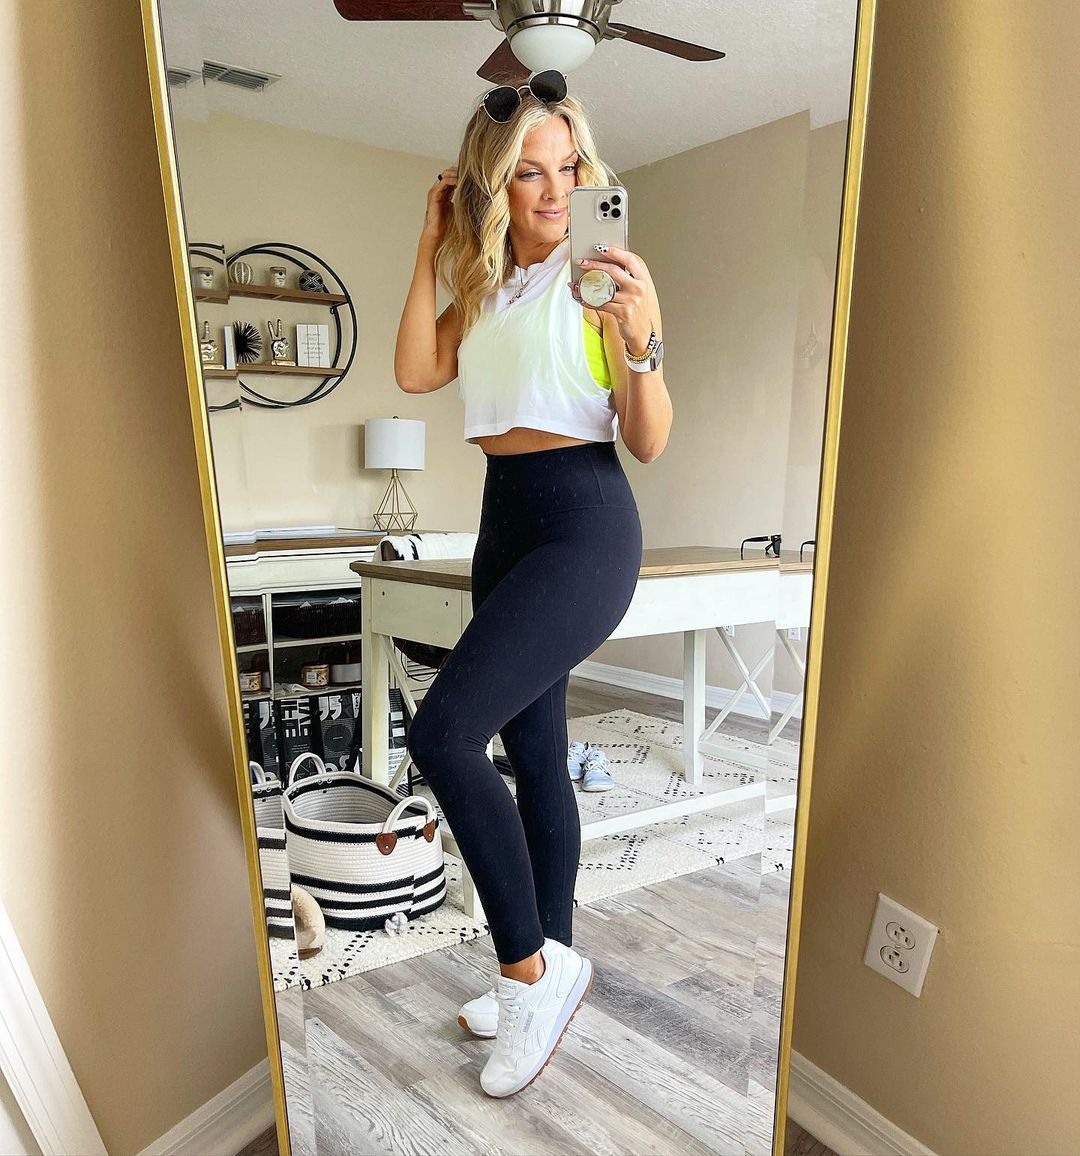 6 leggings outfit ideas to make a fashion statement - Trainfitly